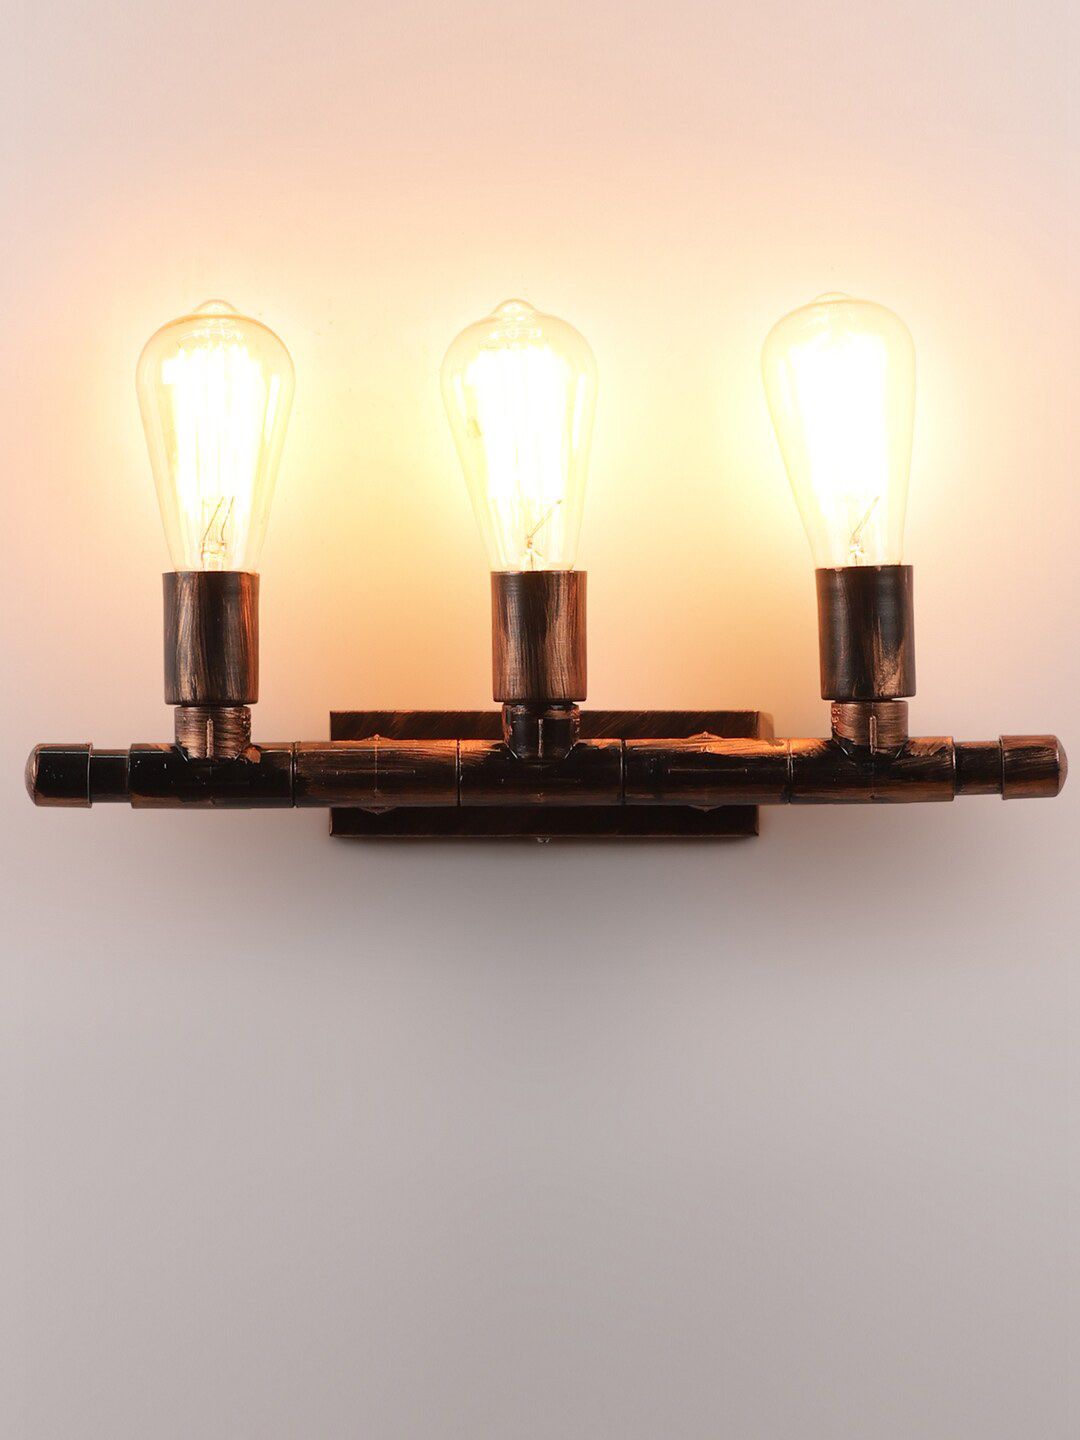 Foziq Brown Industrial Side Wall Lamps Price in India